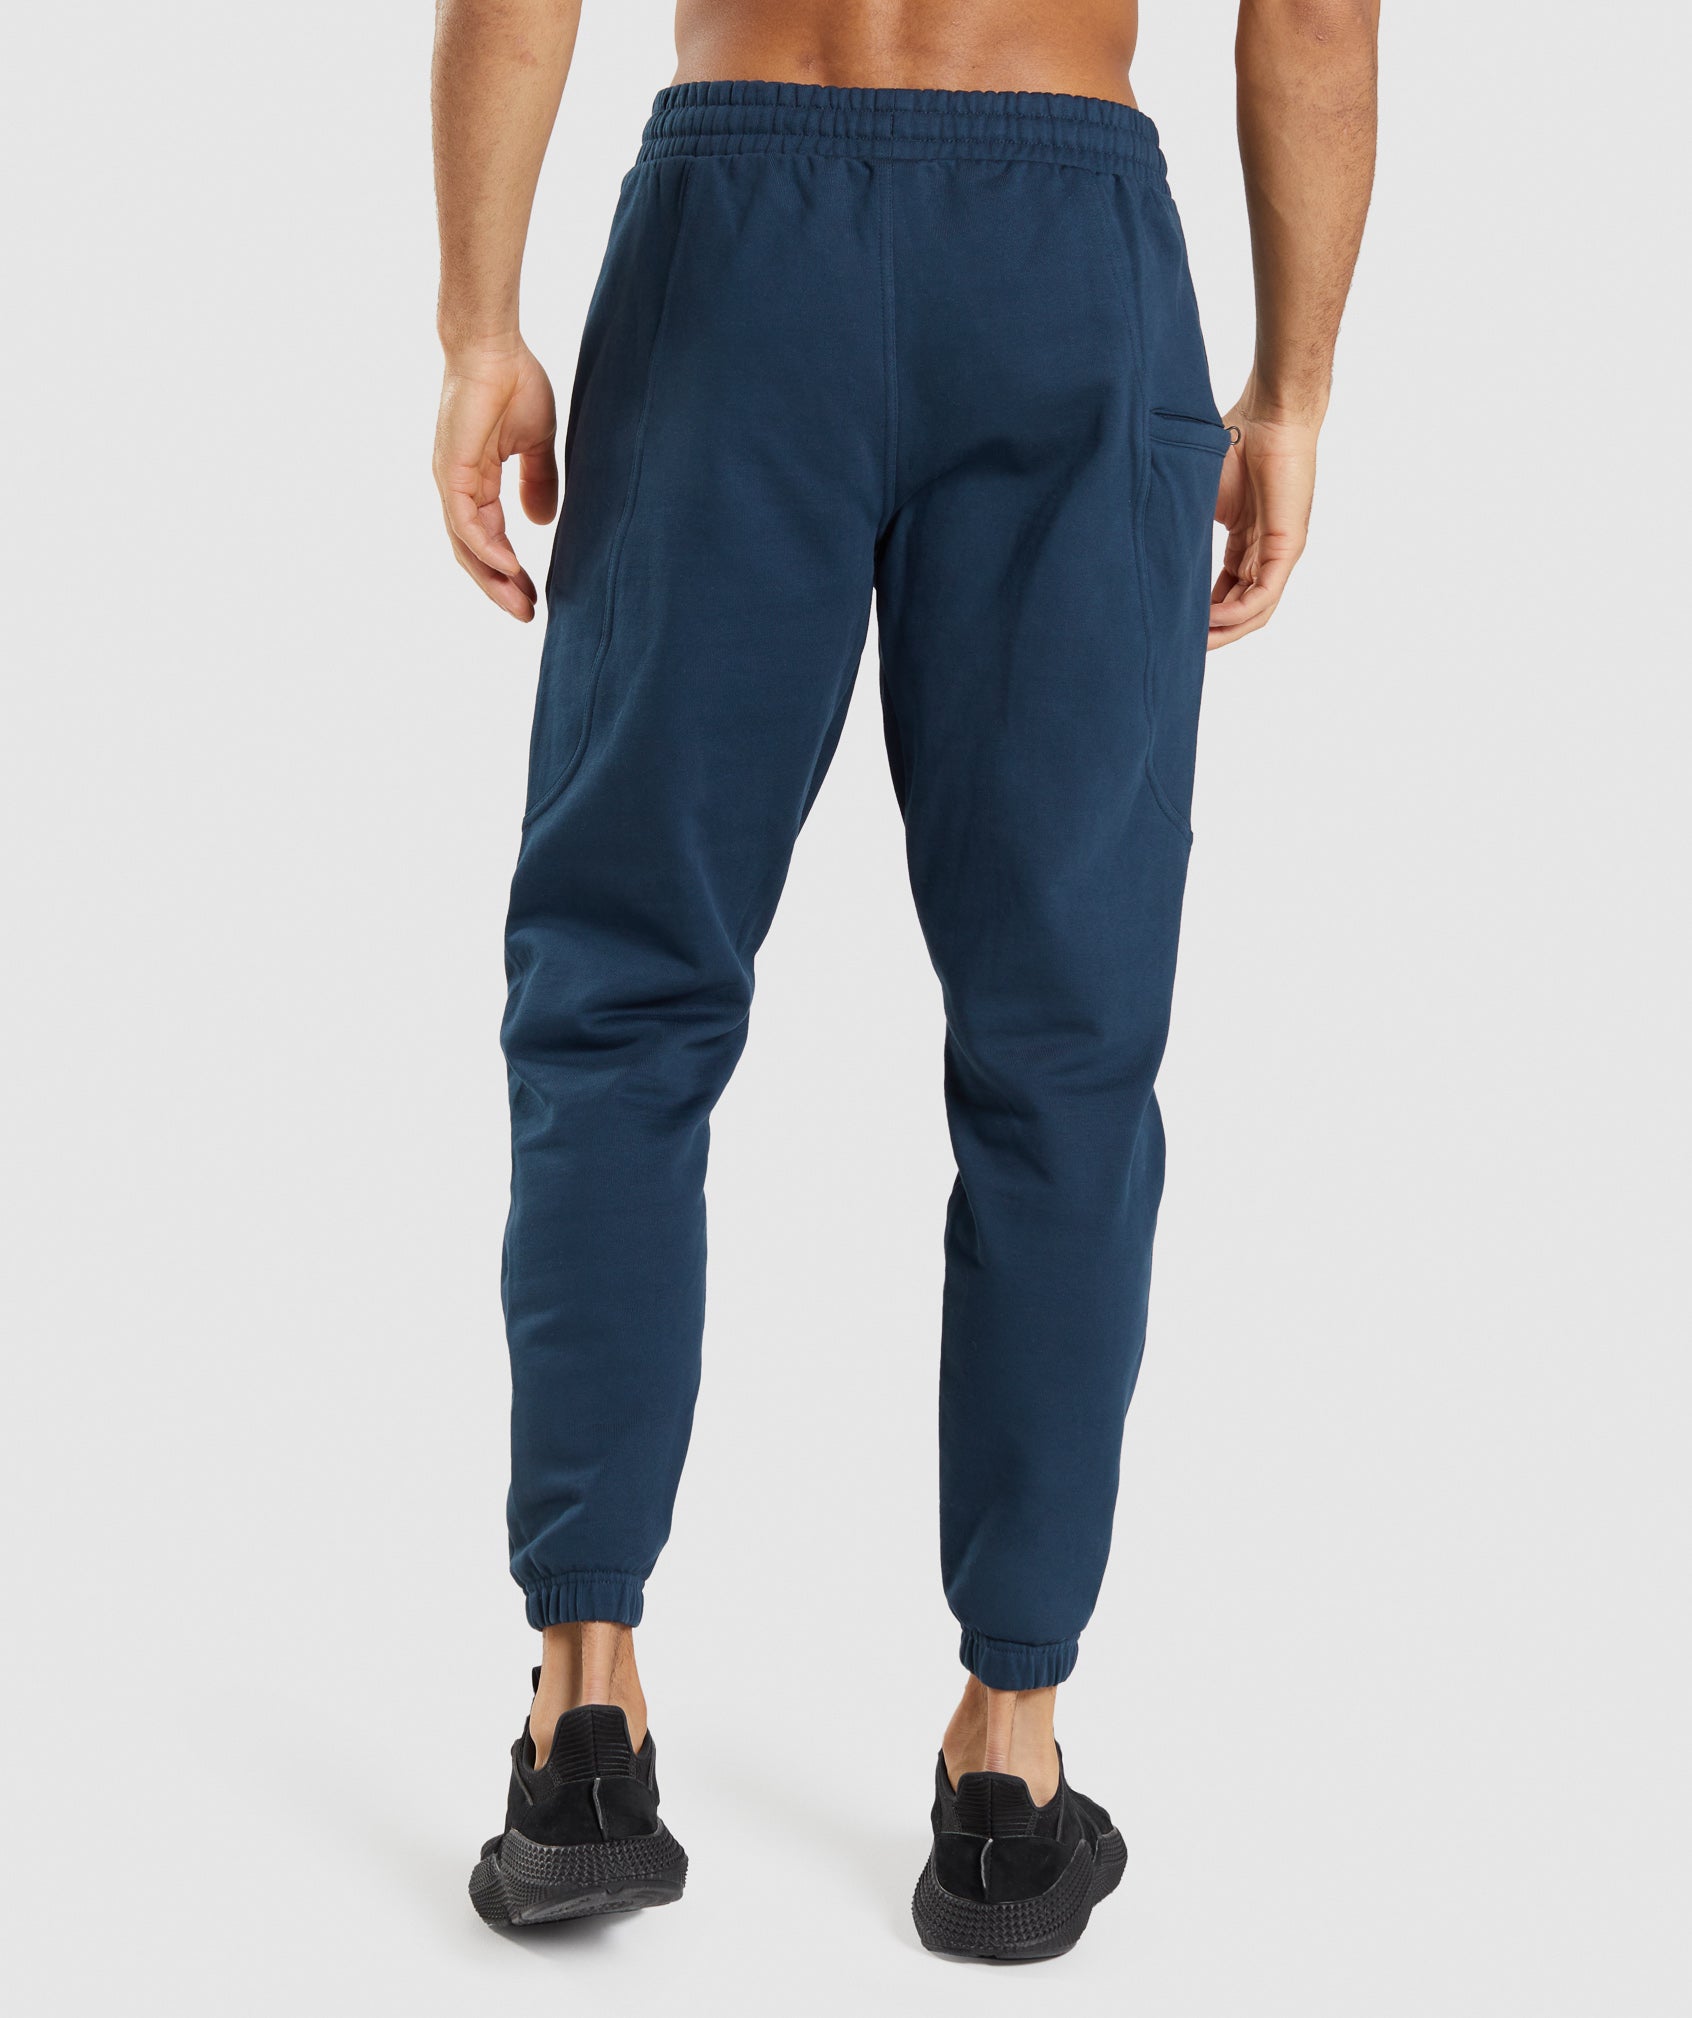 Essential Jogger in Navy - view 2